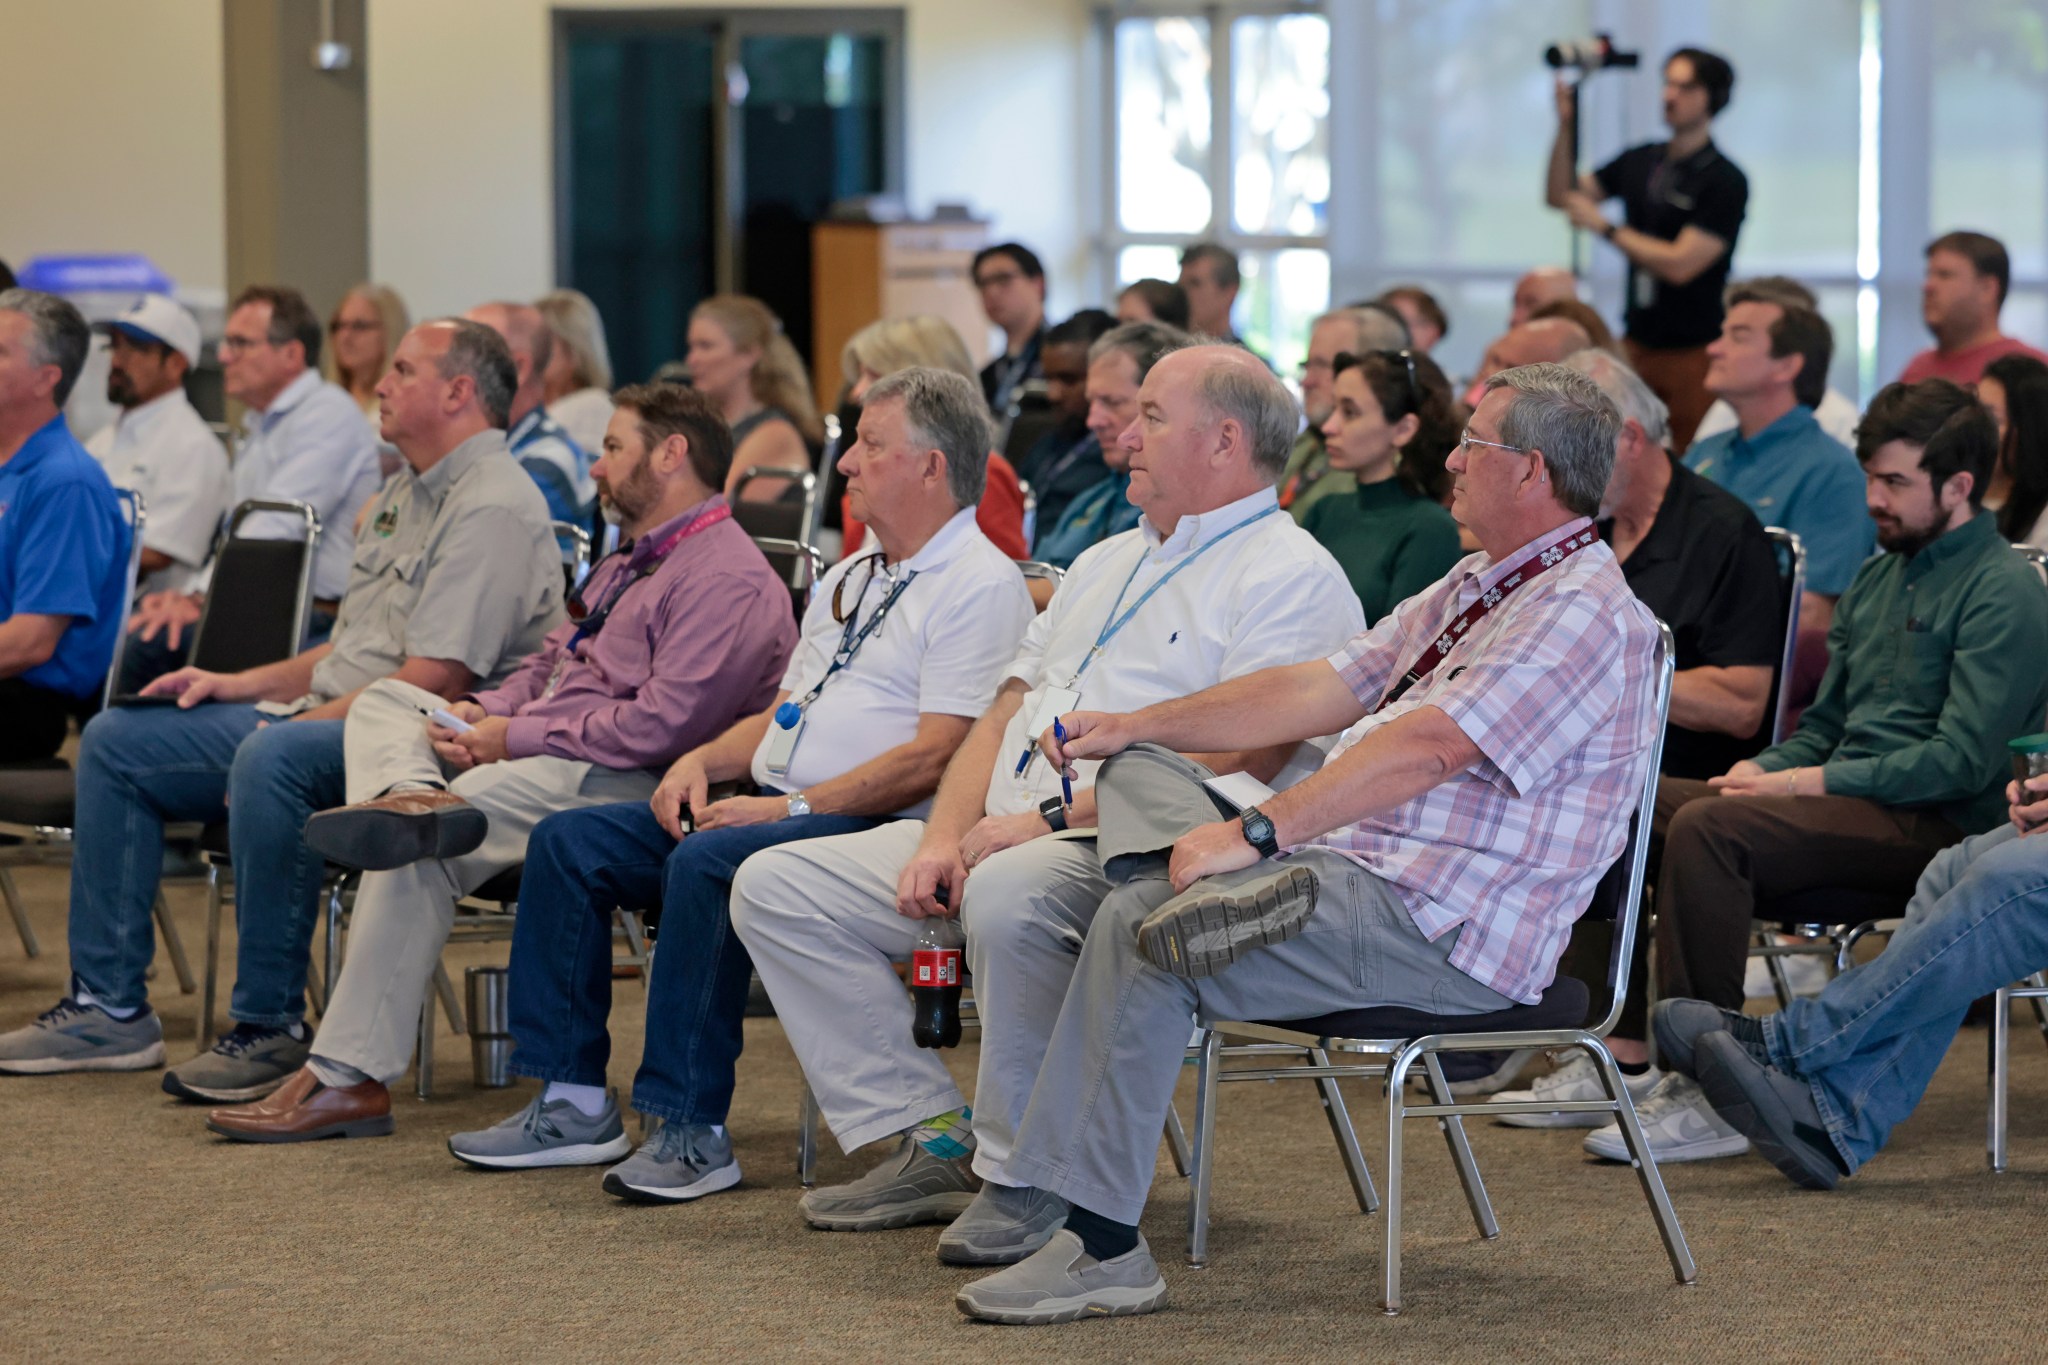 Michoud civil servants and direct support employees attend the facility’s all-hands meeting April 24, getting updates on topics including hardware production, infrastructure, and NASA 2040.